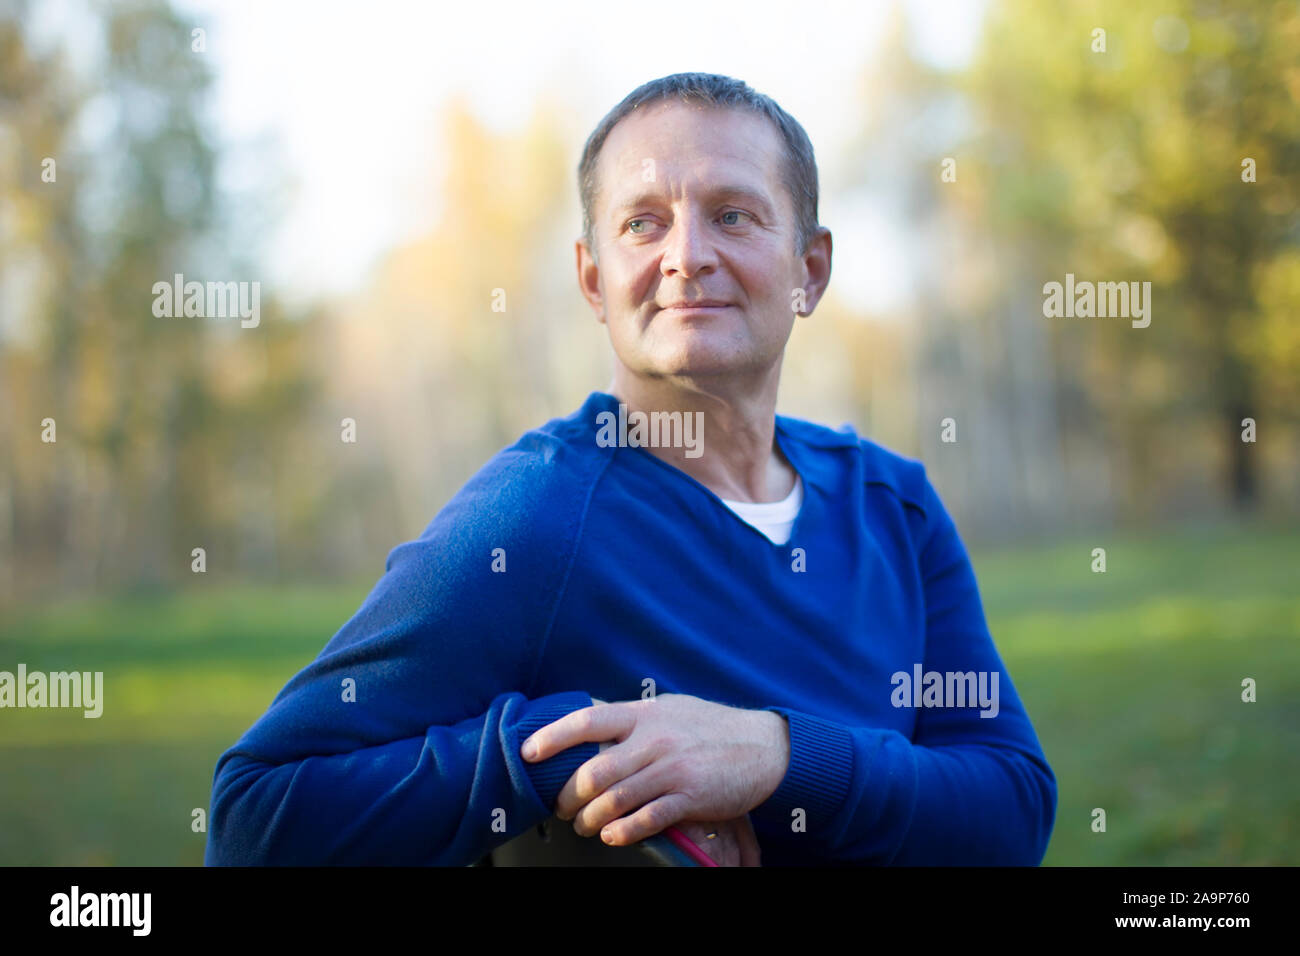 Portrait of a handsome elderly man outdoors Stock Photo